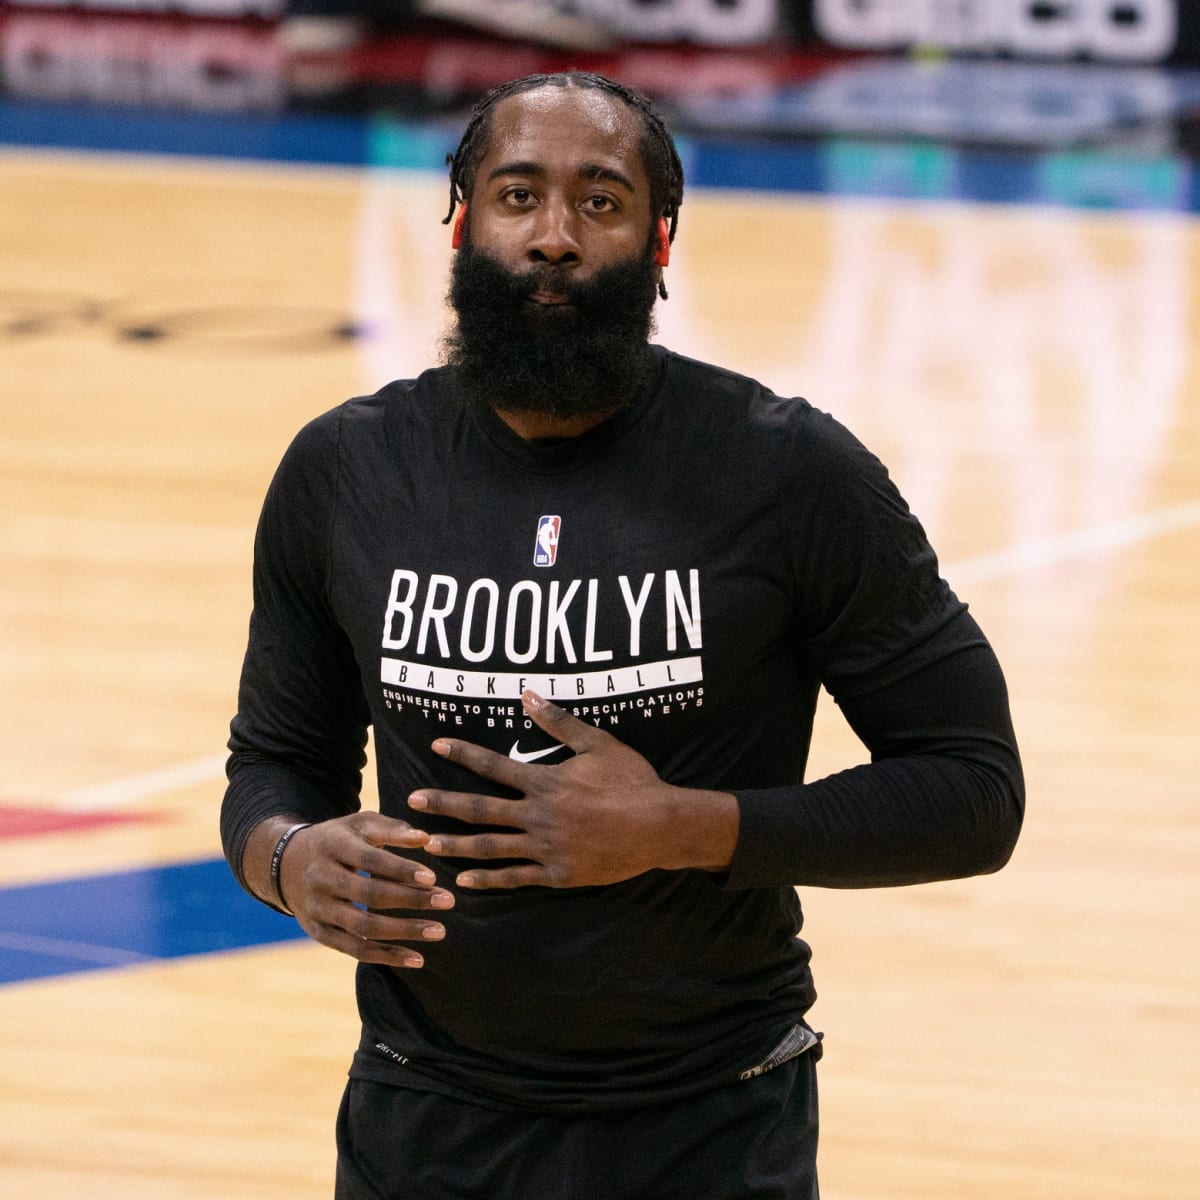 James Harden's Trade Standoff With The Sixers Has Reached A New Low